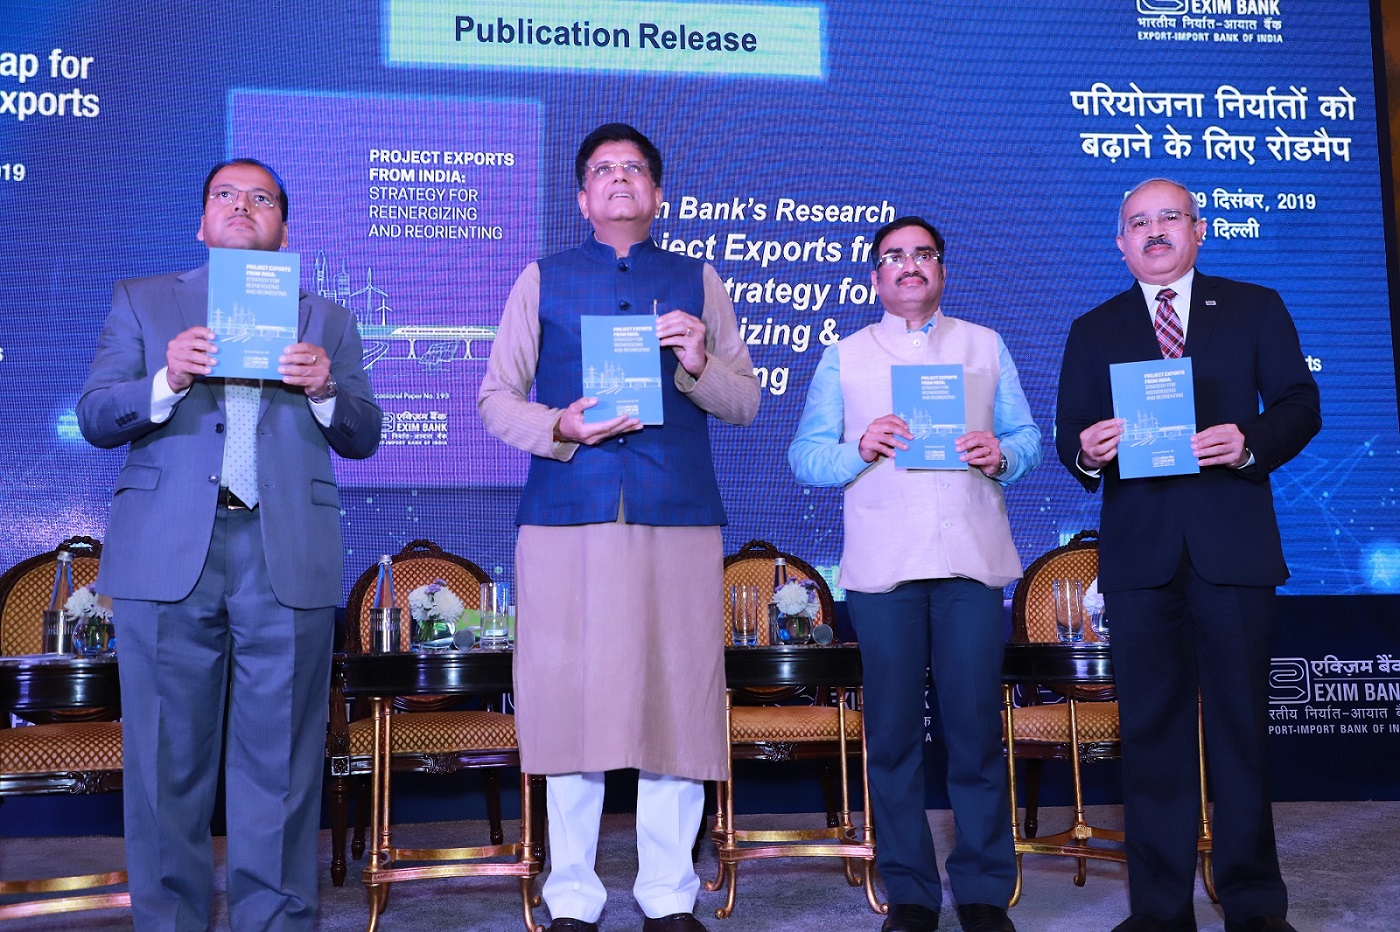 Release of Exim Bank’s Publication entitled “Project Exports from India: Strategy for Reenergizing and Reorienting” by Mr. Piyush Goyal, Hon’ble Minister of Commerce and Industry, Government of India, during the Valedictory Session of the seminar on “Building a Roadmap for Boosting Project Exports” -Photo By Sachin Murdeshwar GPN